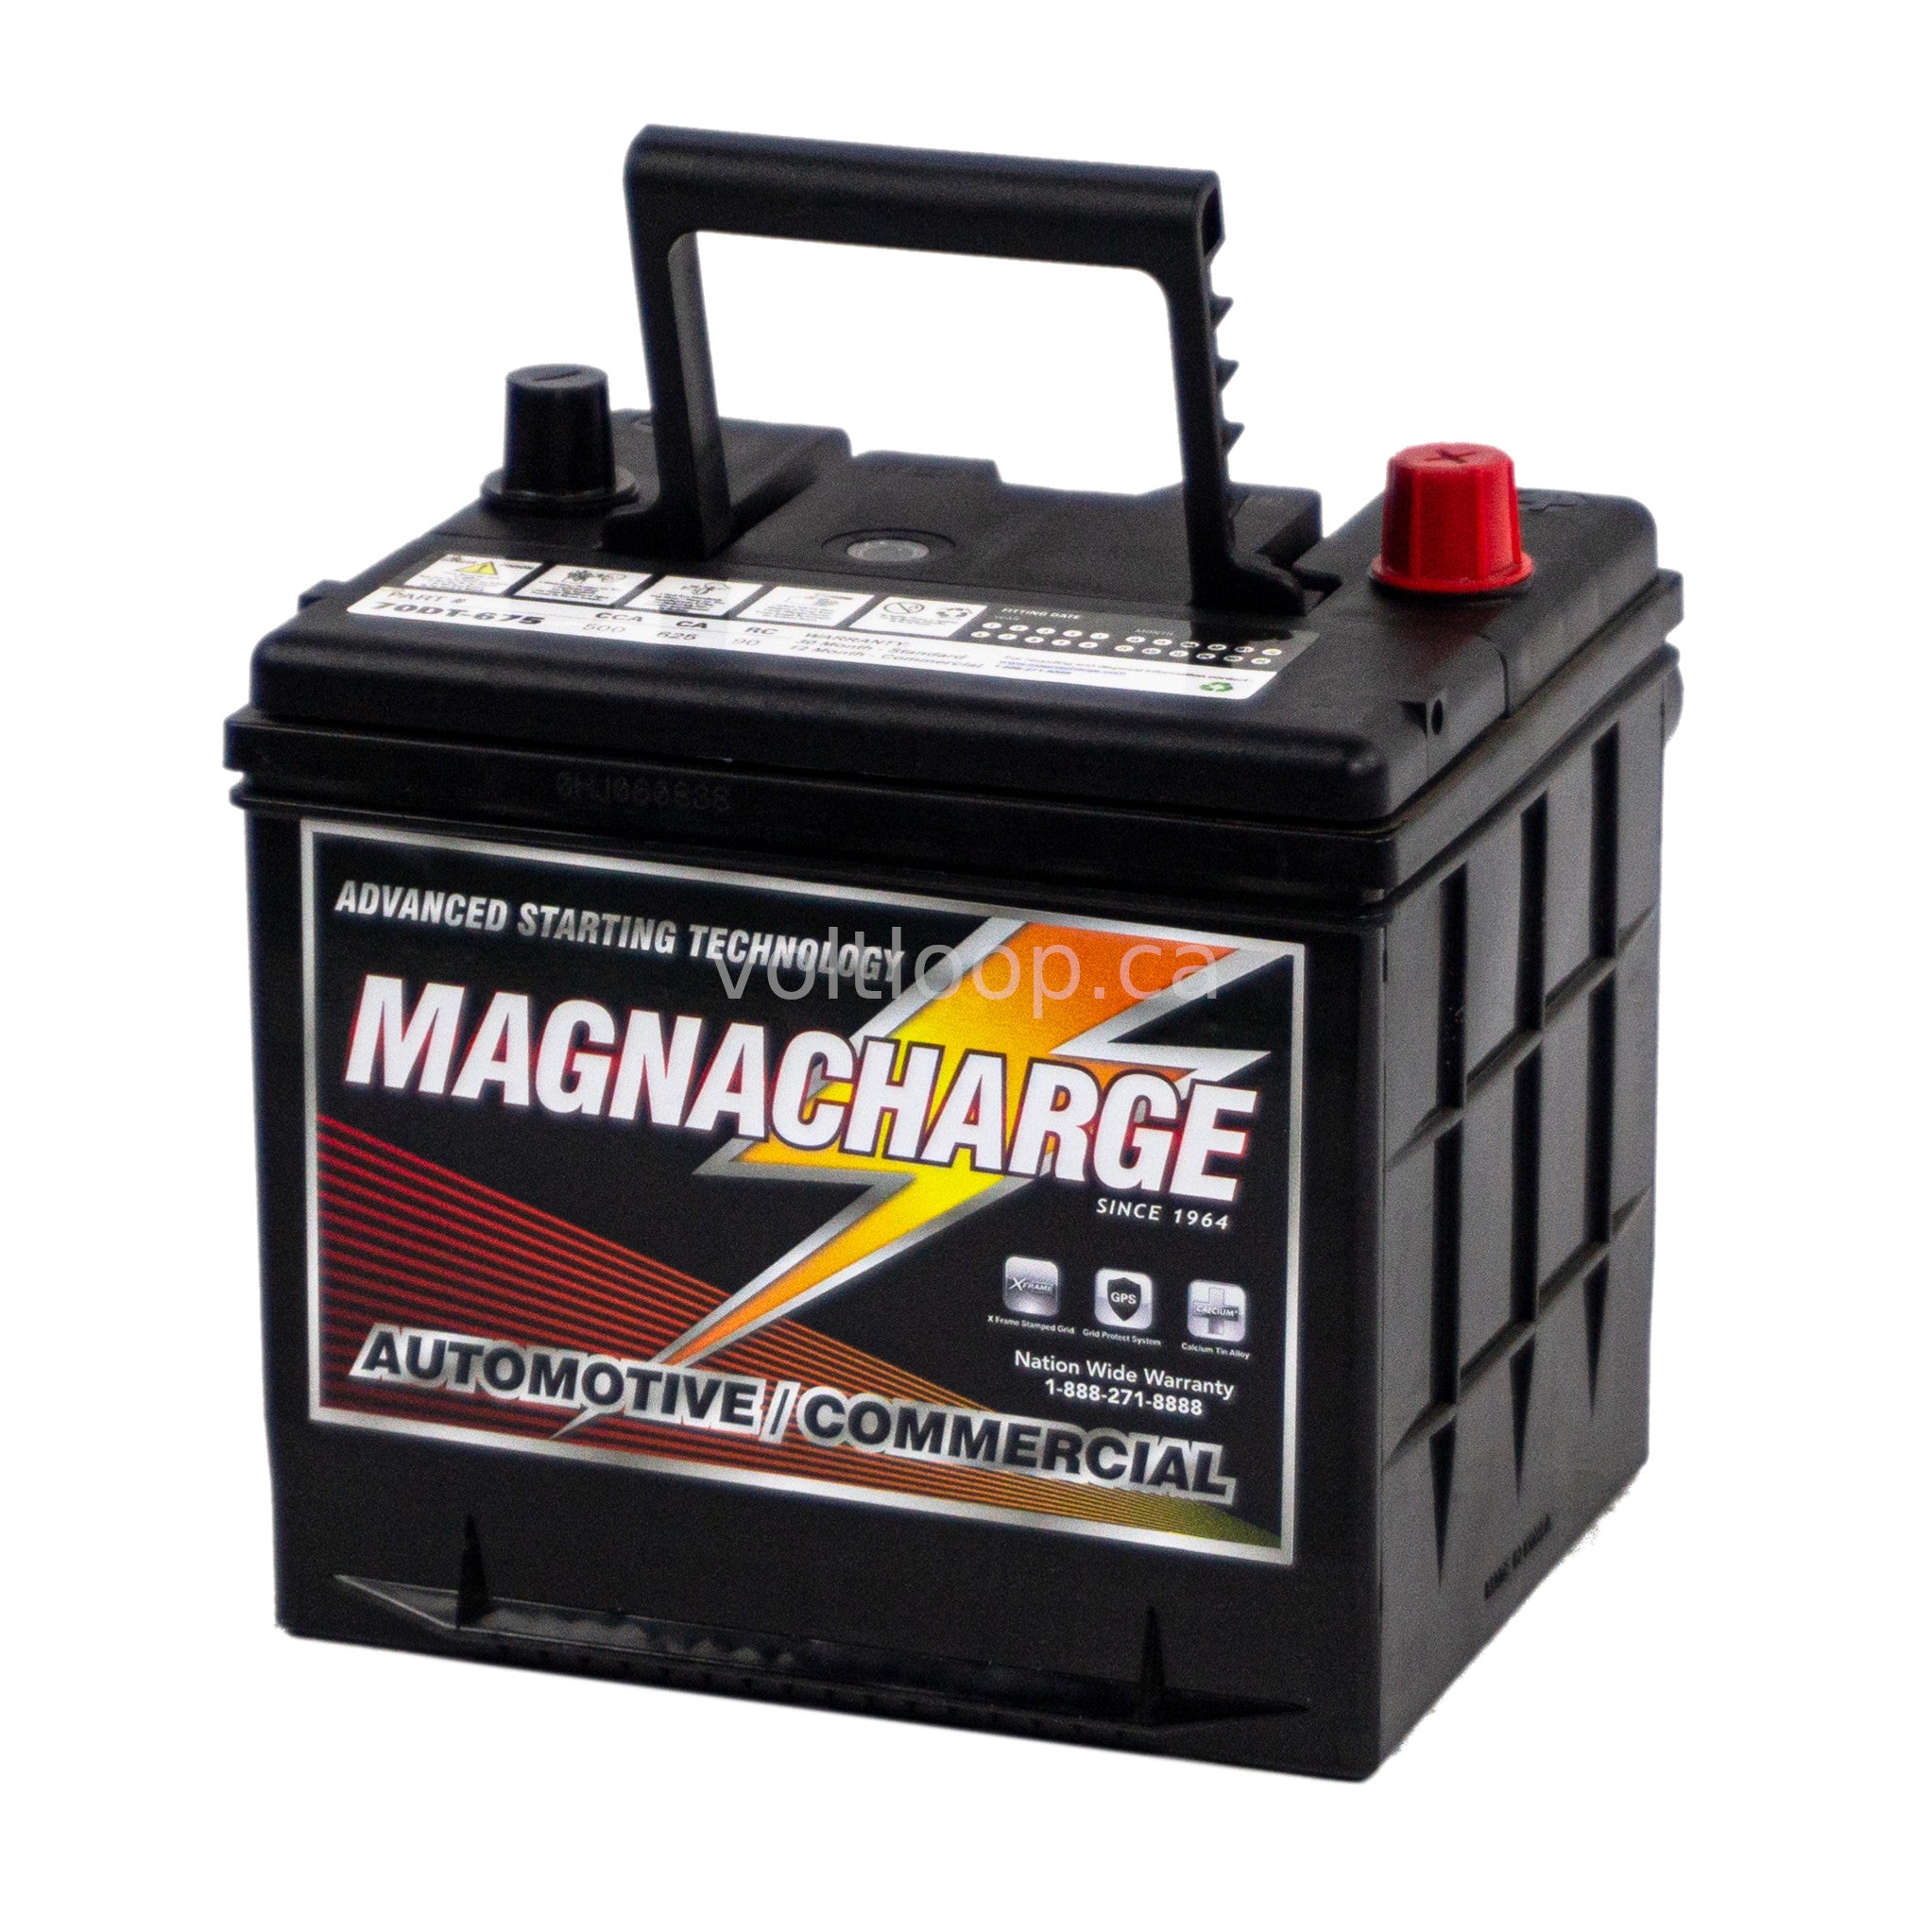 Magnacharge 70DT-675 Group 26/70 Car Battery